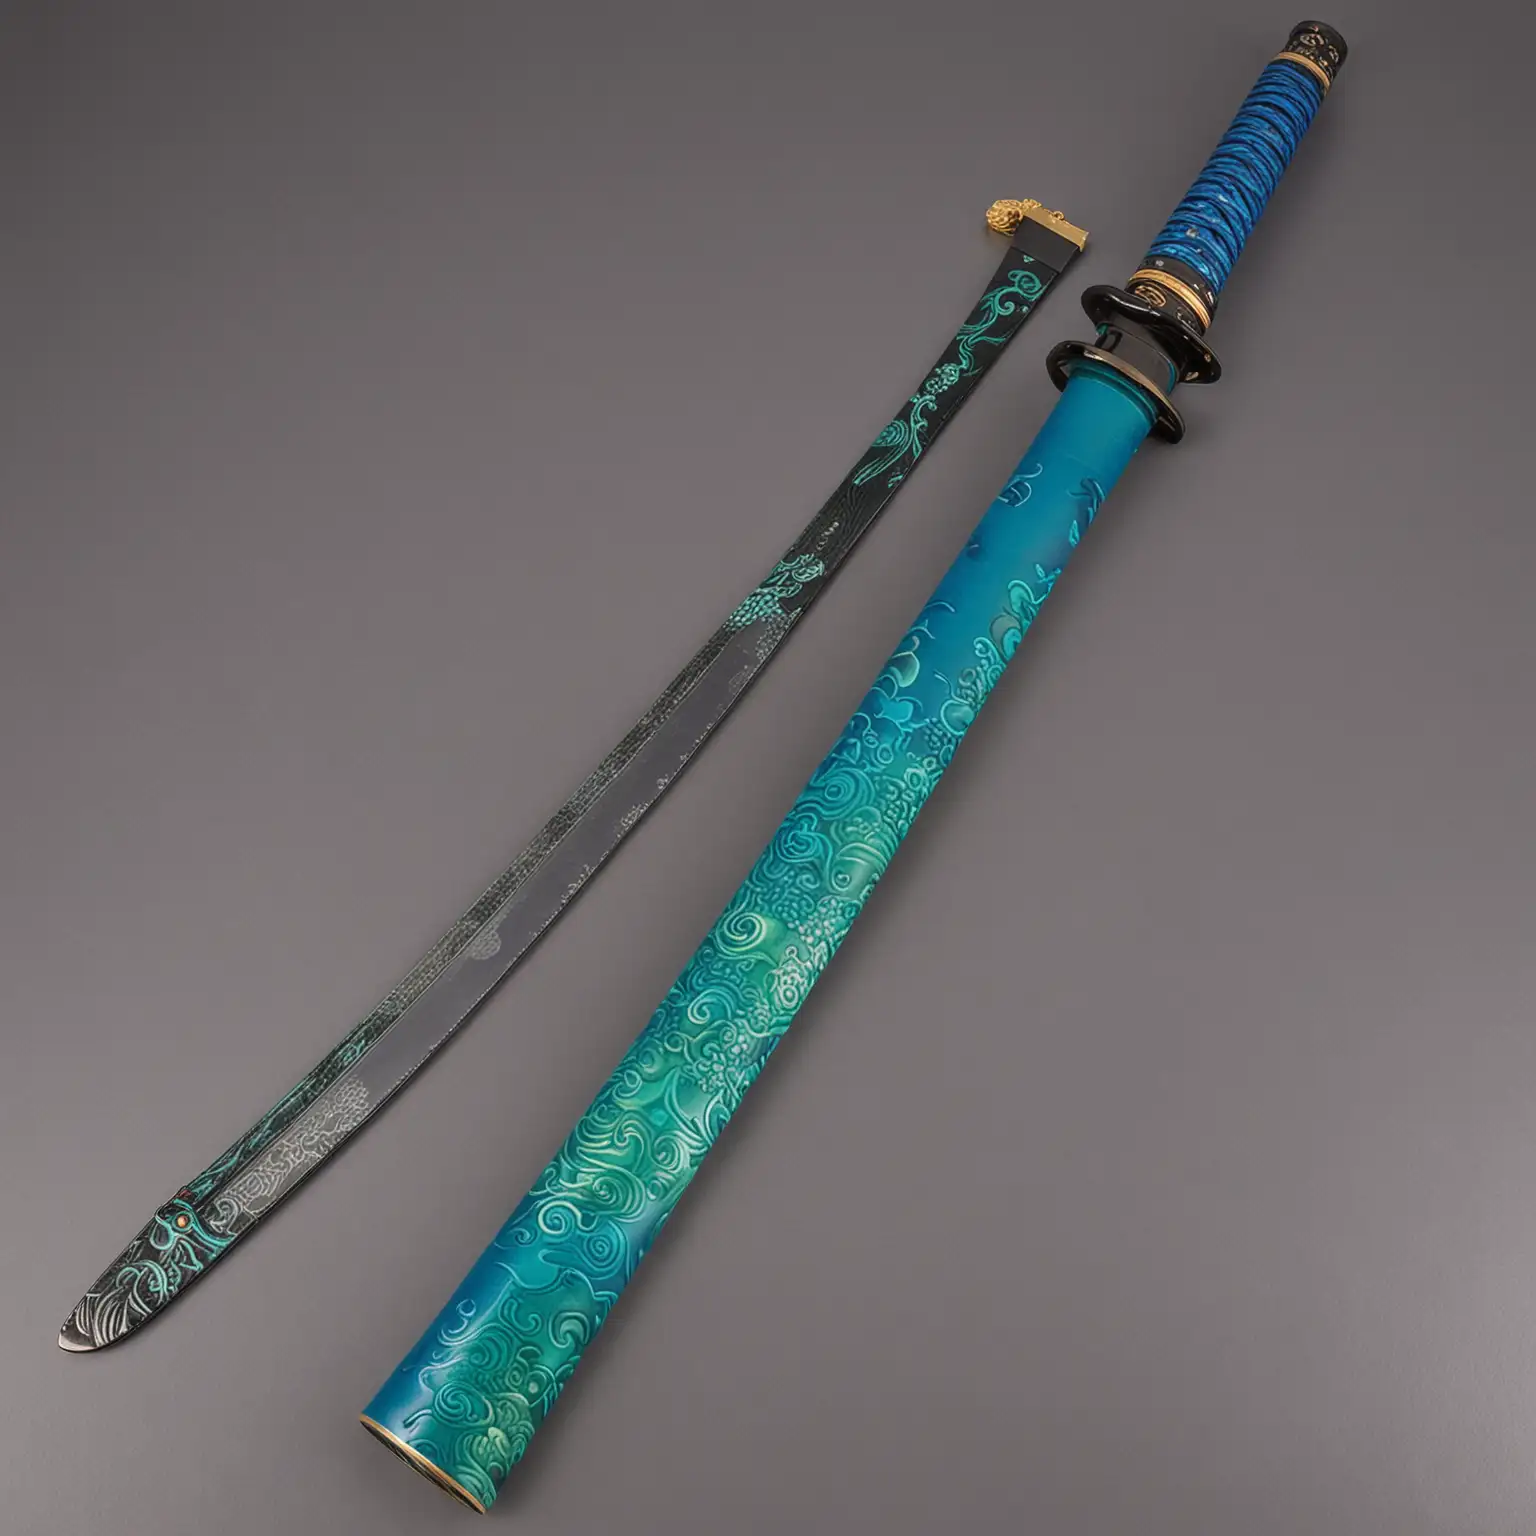 a long, blue and green katana scabbard without the blade in it